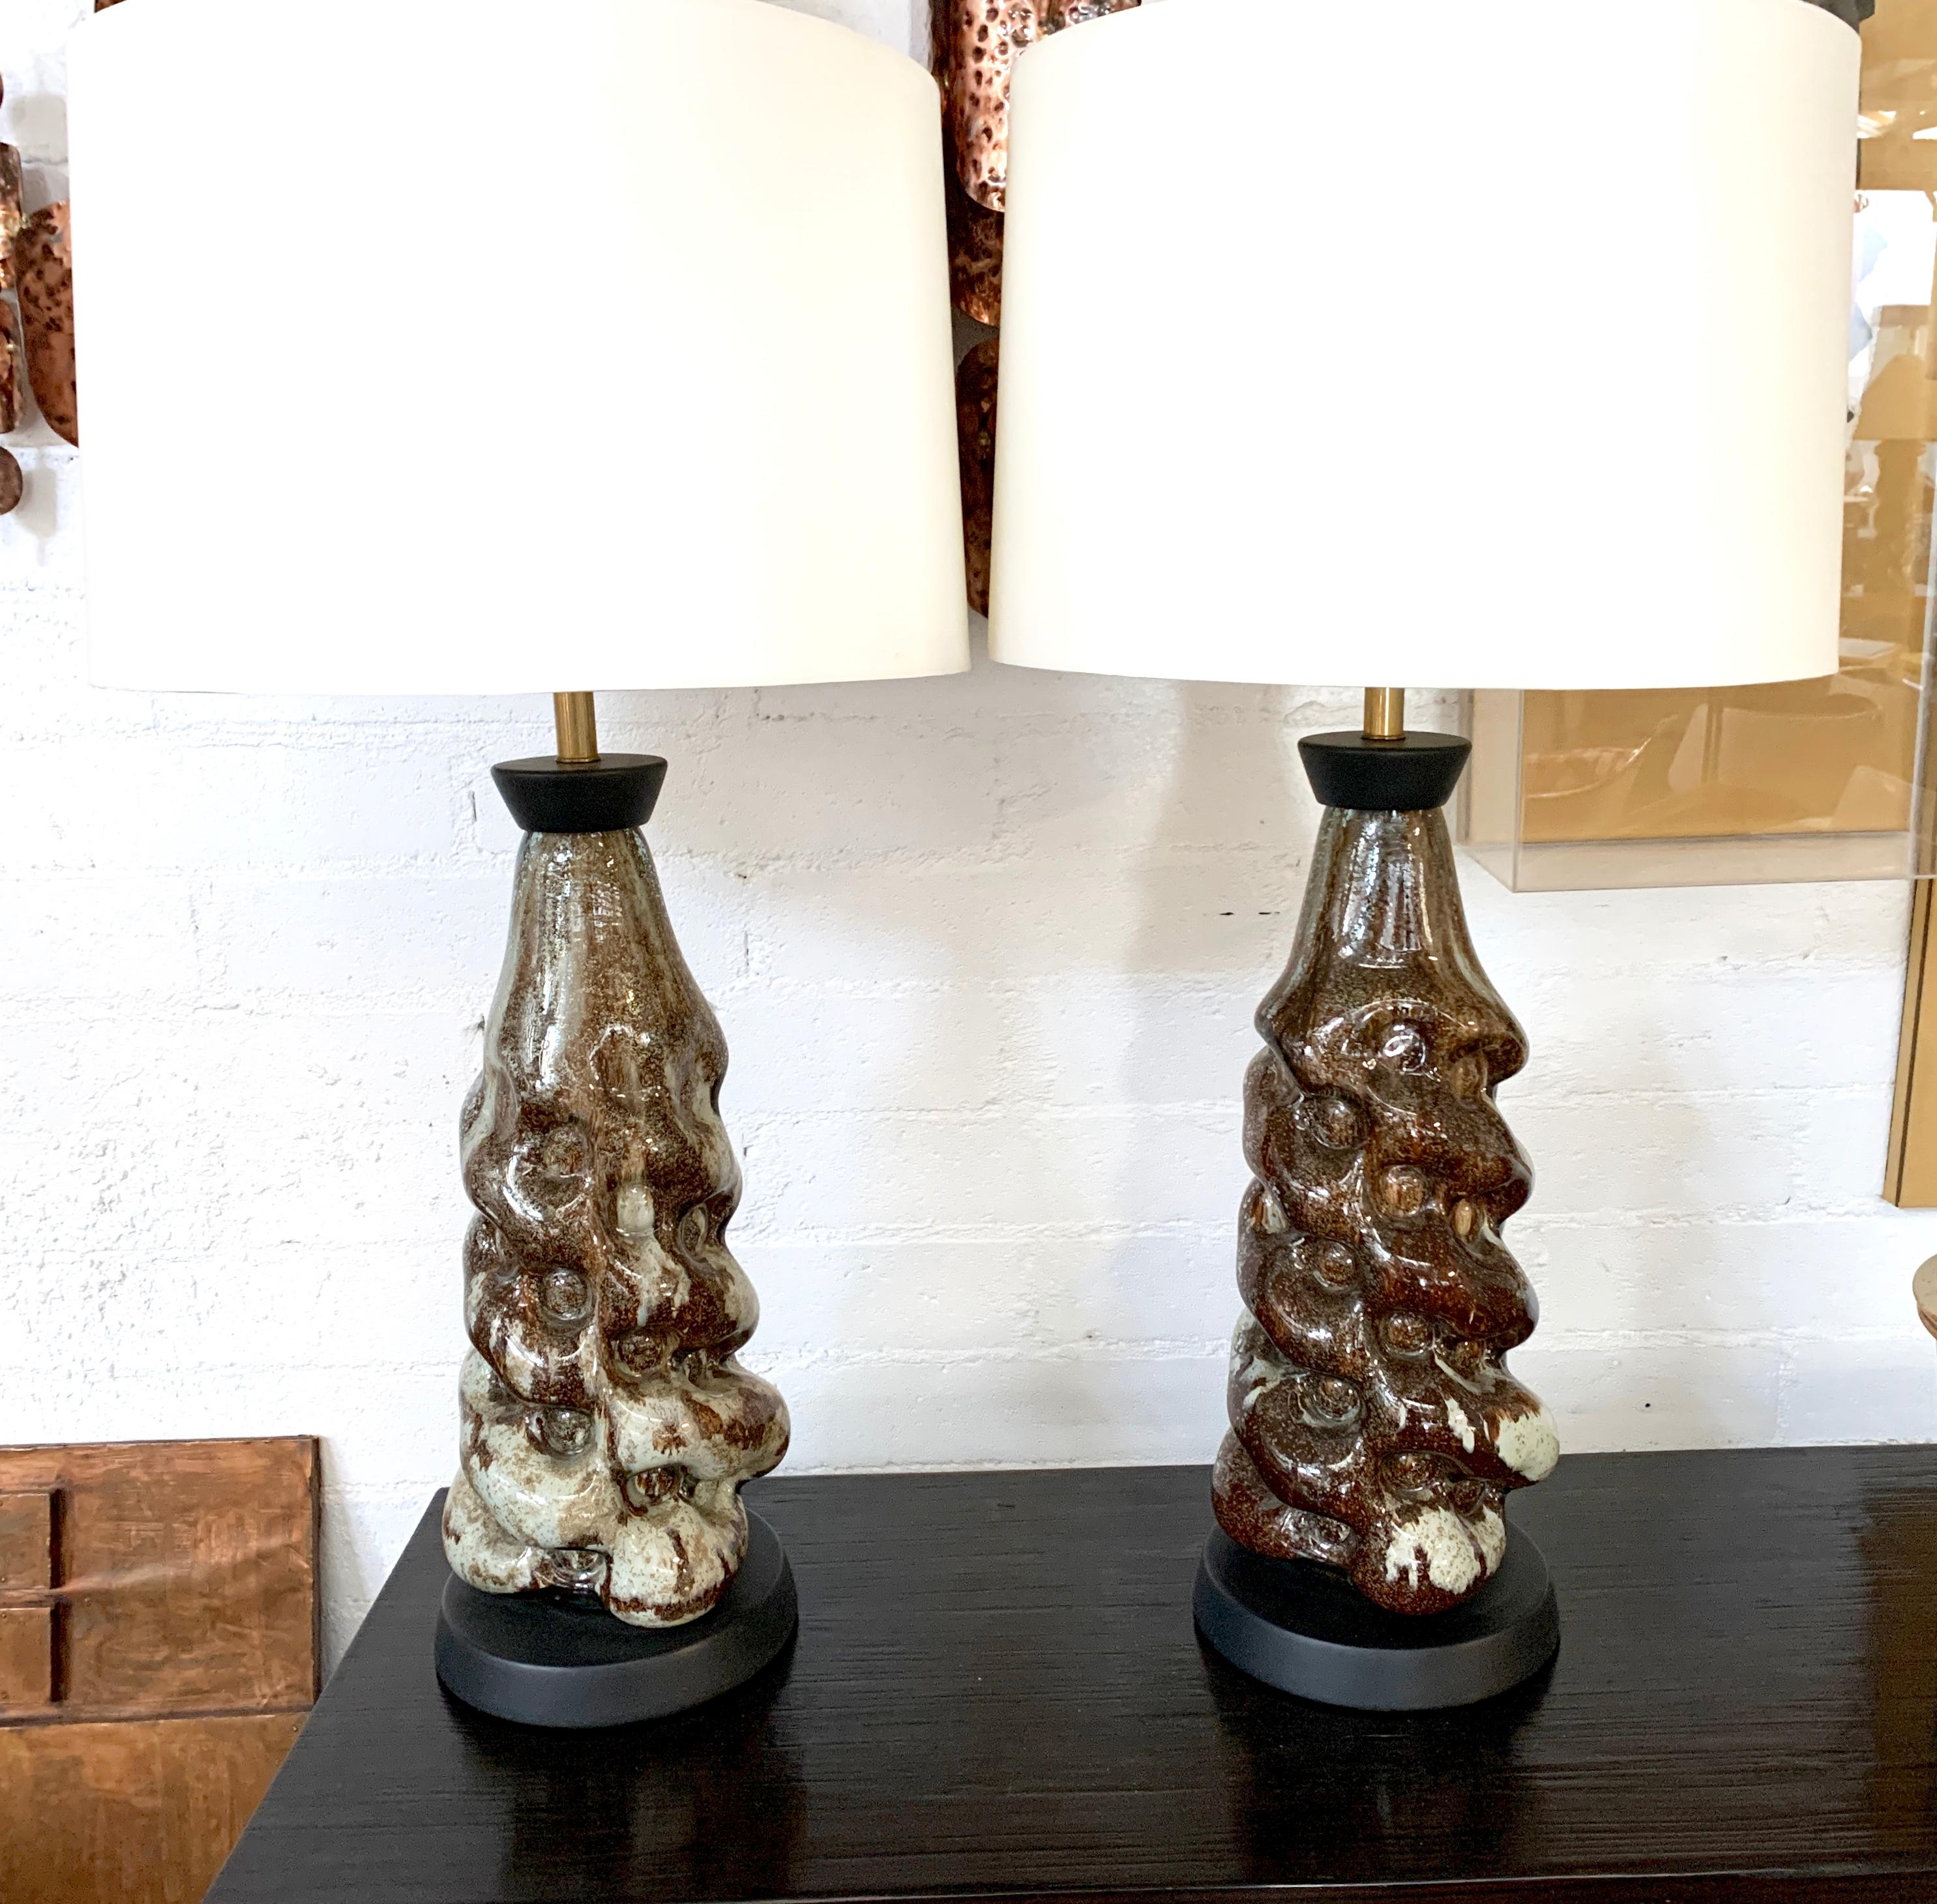 A stunning pair of Murano lamps. There have been redone and feature new shades. Shades are 18 inches in diameter.
Minor wear with original fittings although they have been re-wired.